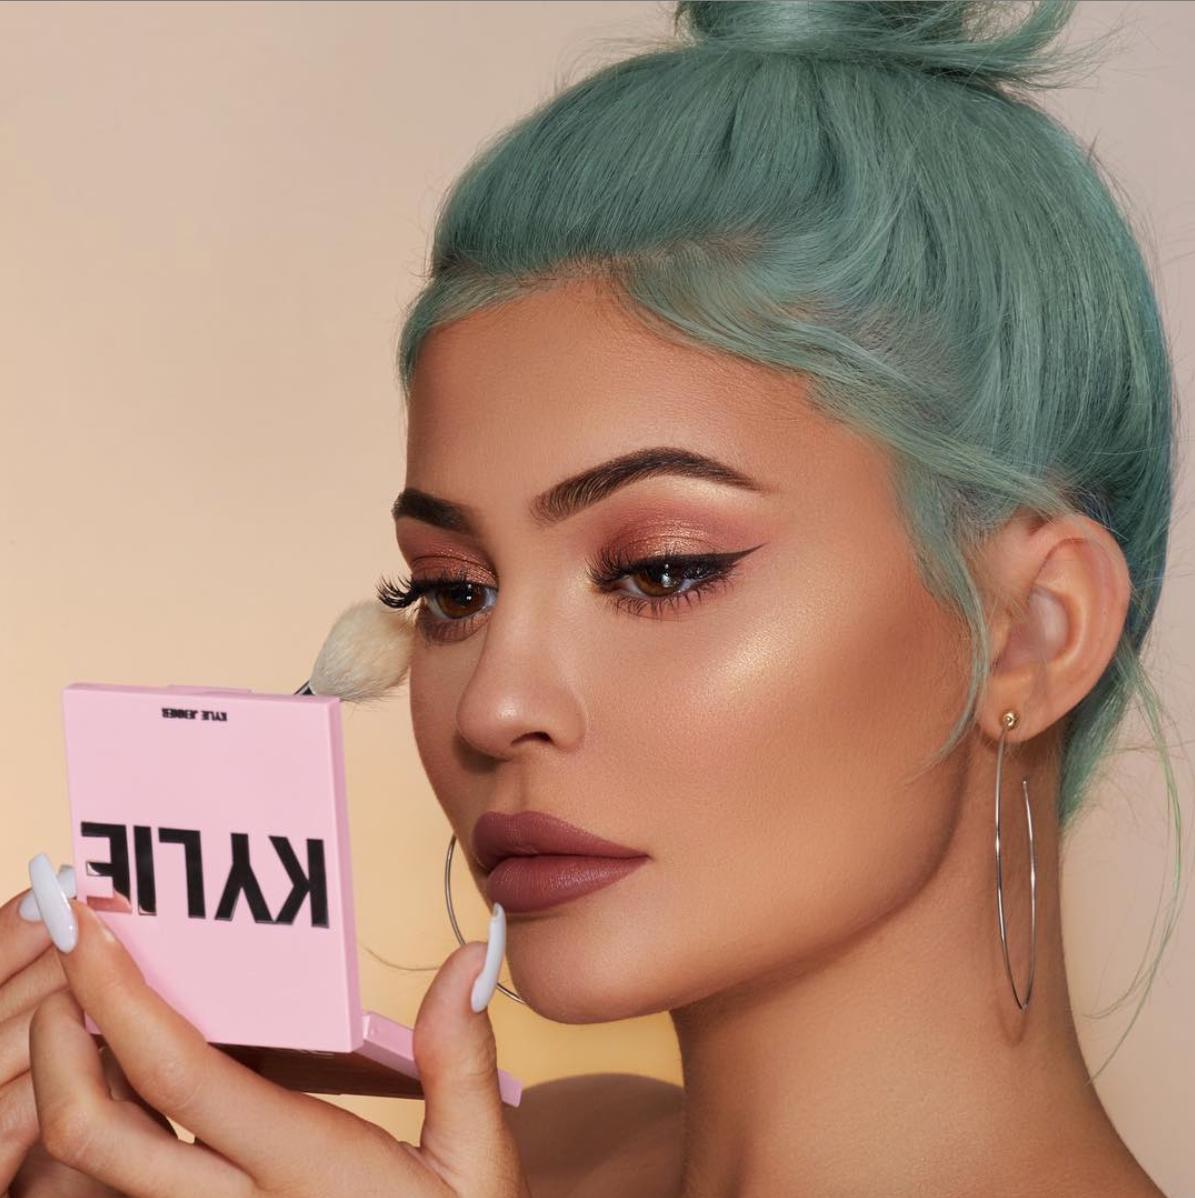 Kylie Jenner's makeup products are already on sale in Spain